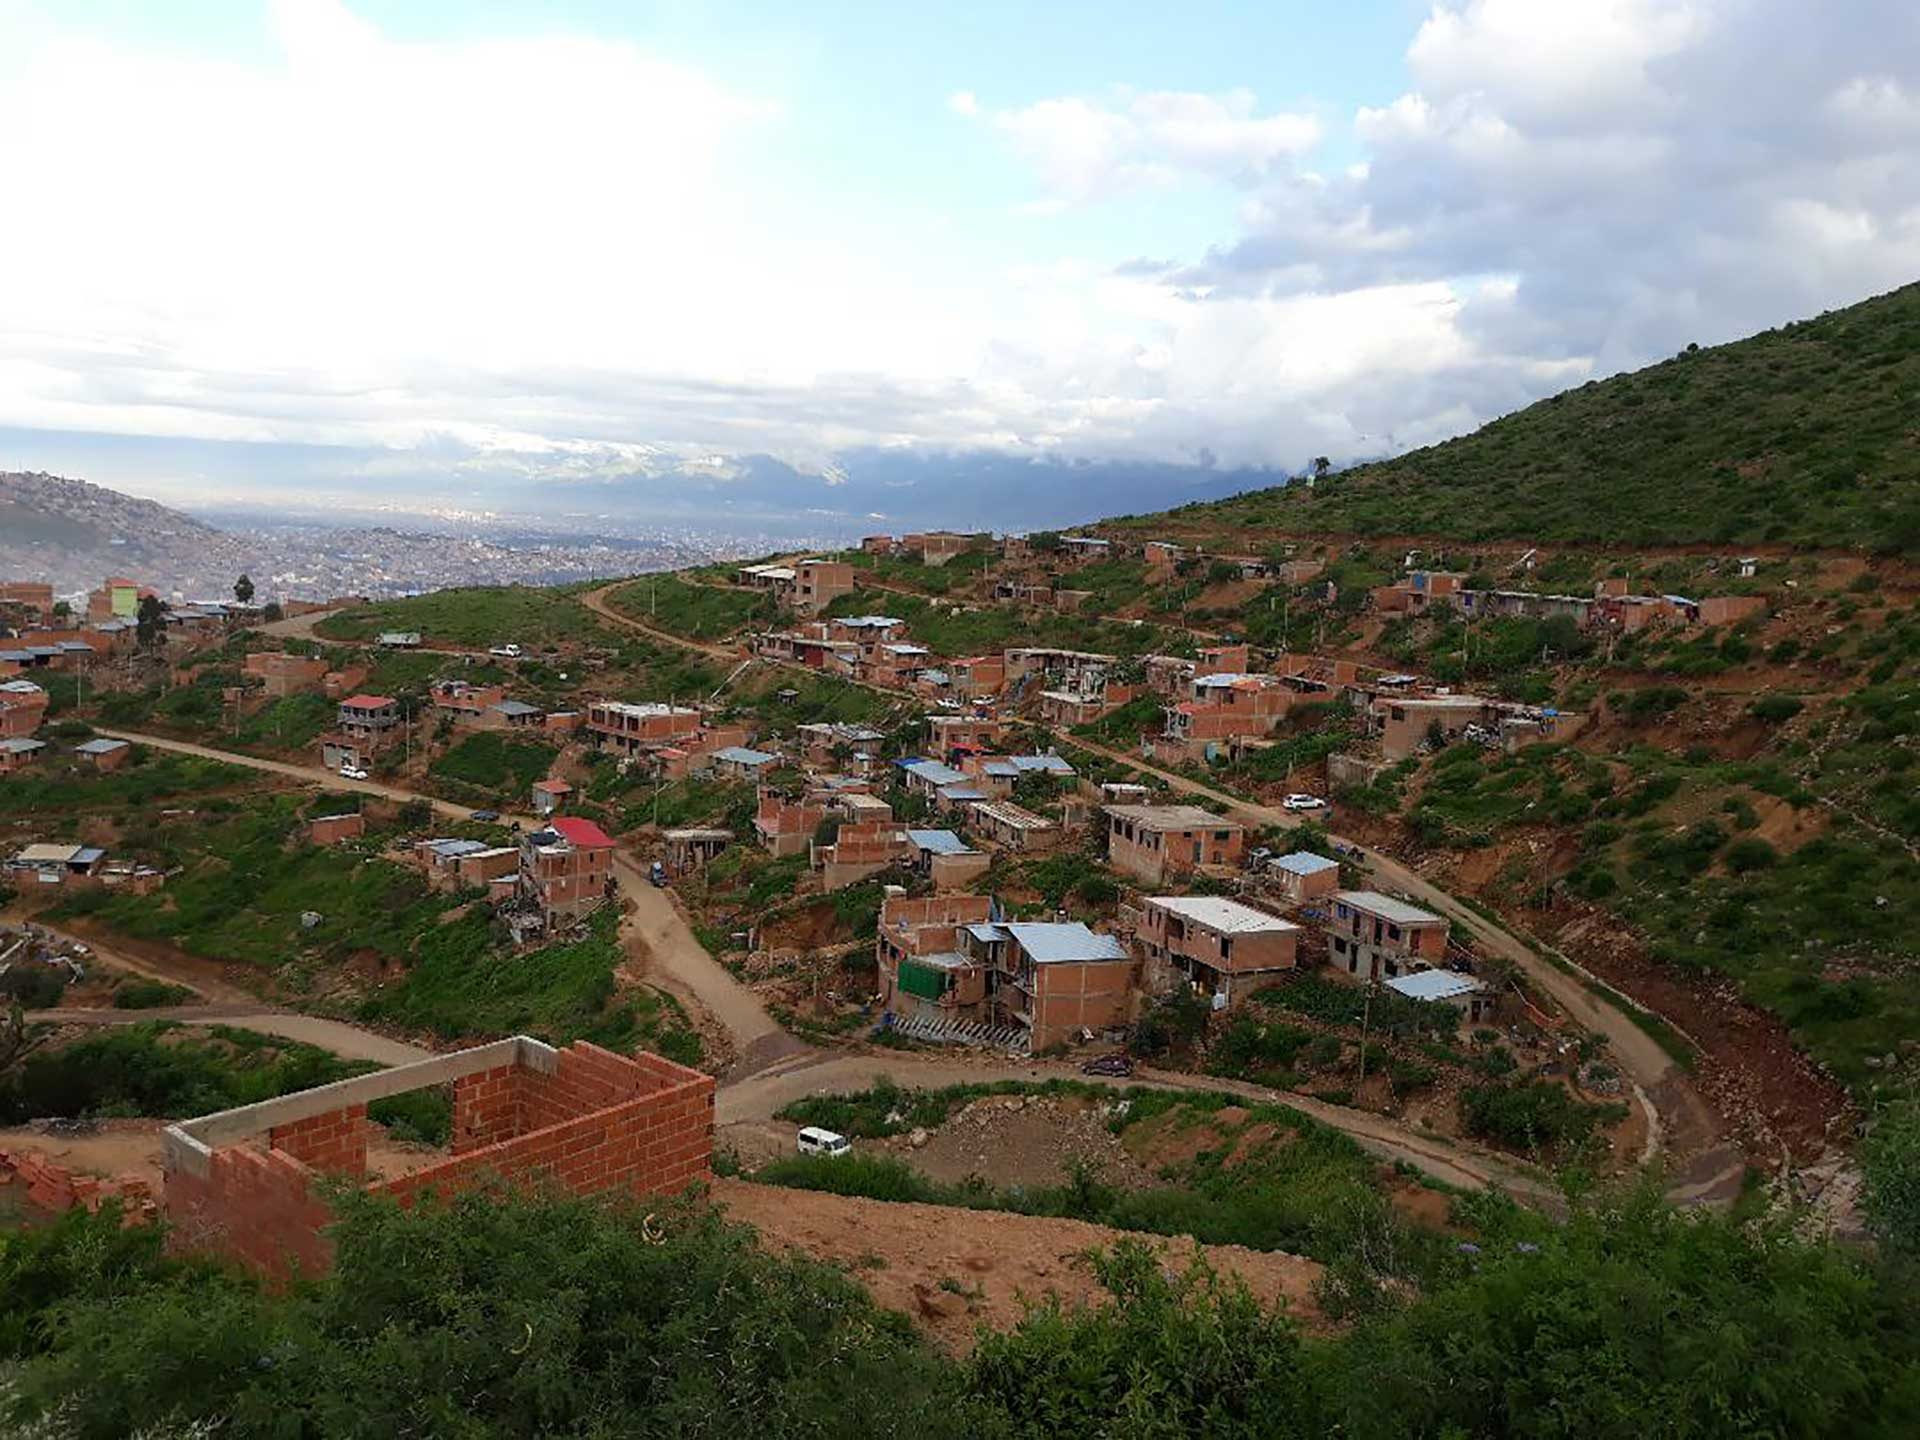 Cochabamba, Bolivia:  Confronting speculators and financing community infrastructure